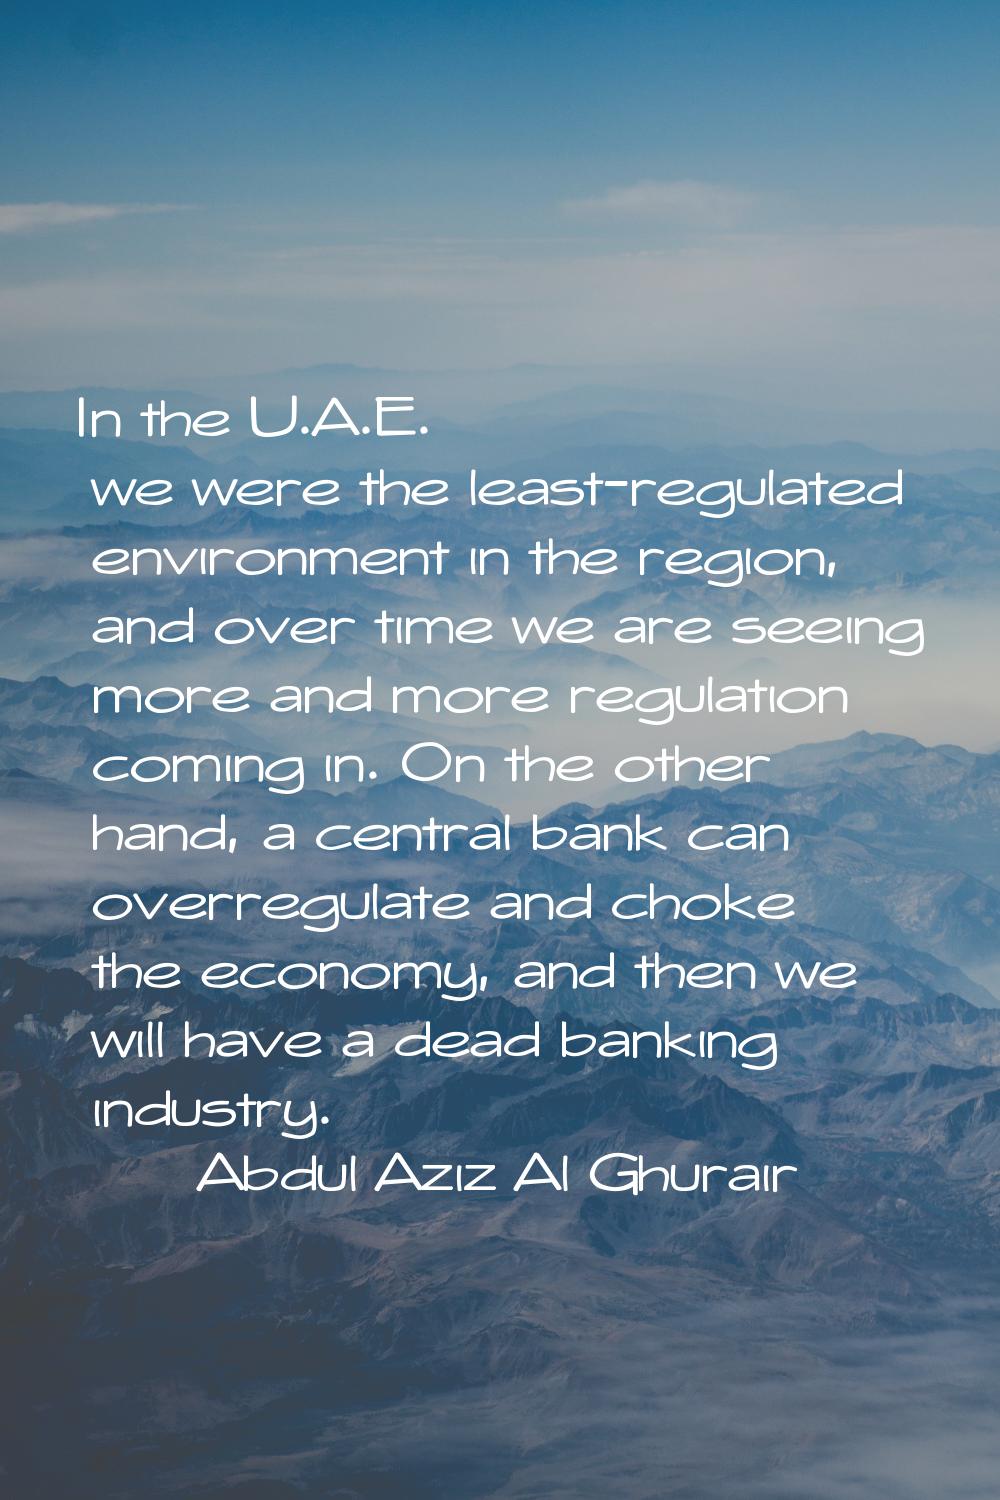 In the U.A.E. we were the least-regulated environment in the region, and over time we are seeing mo